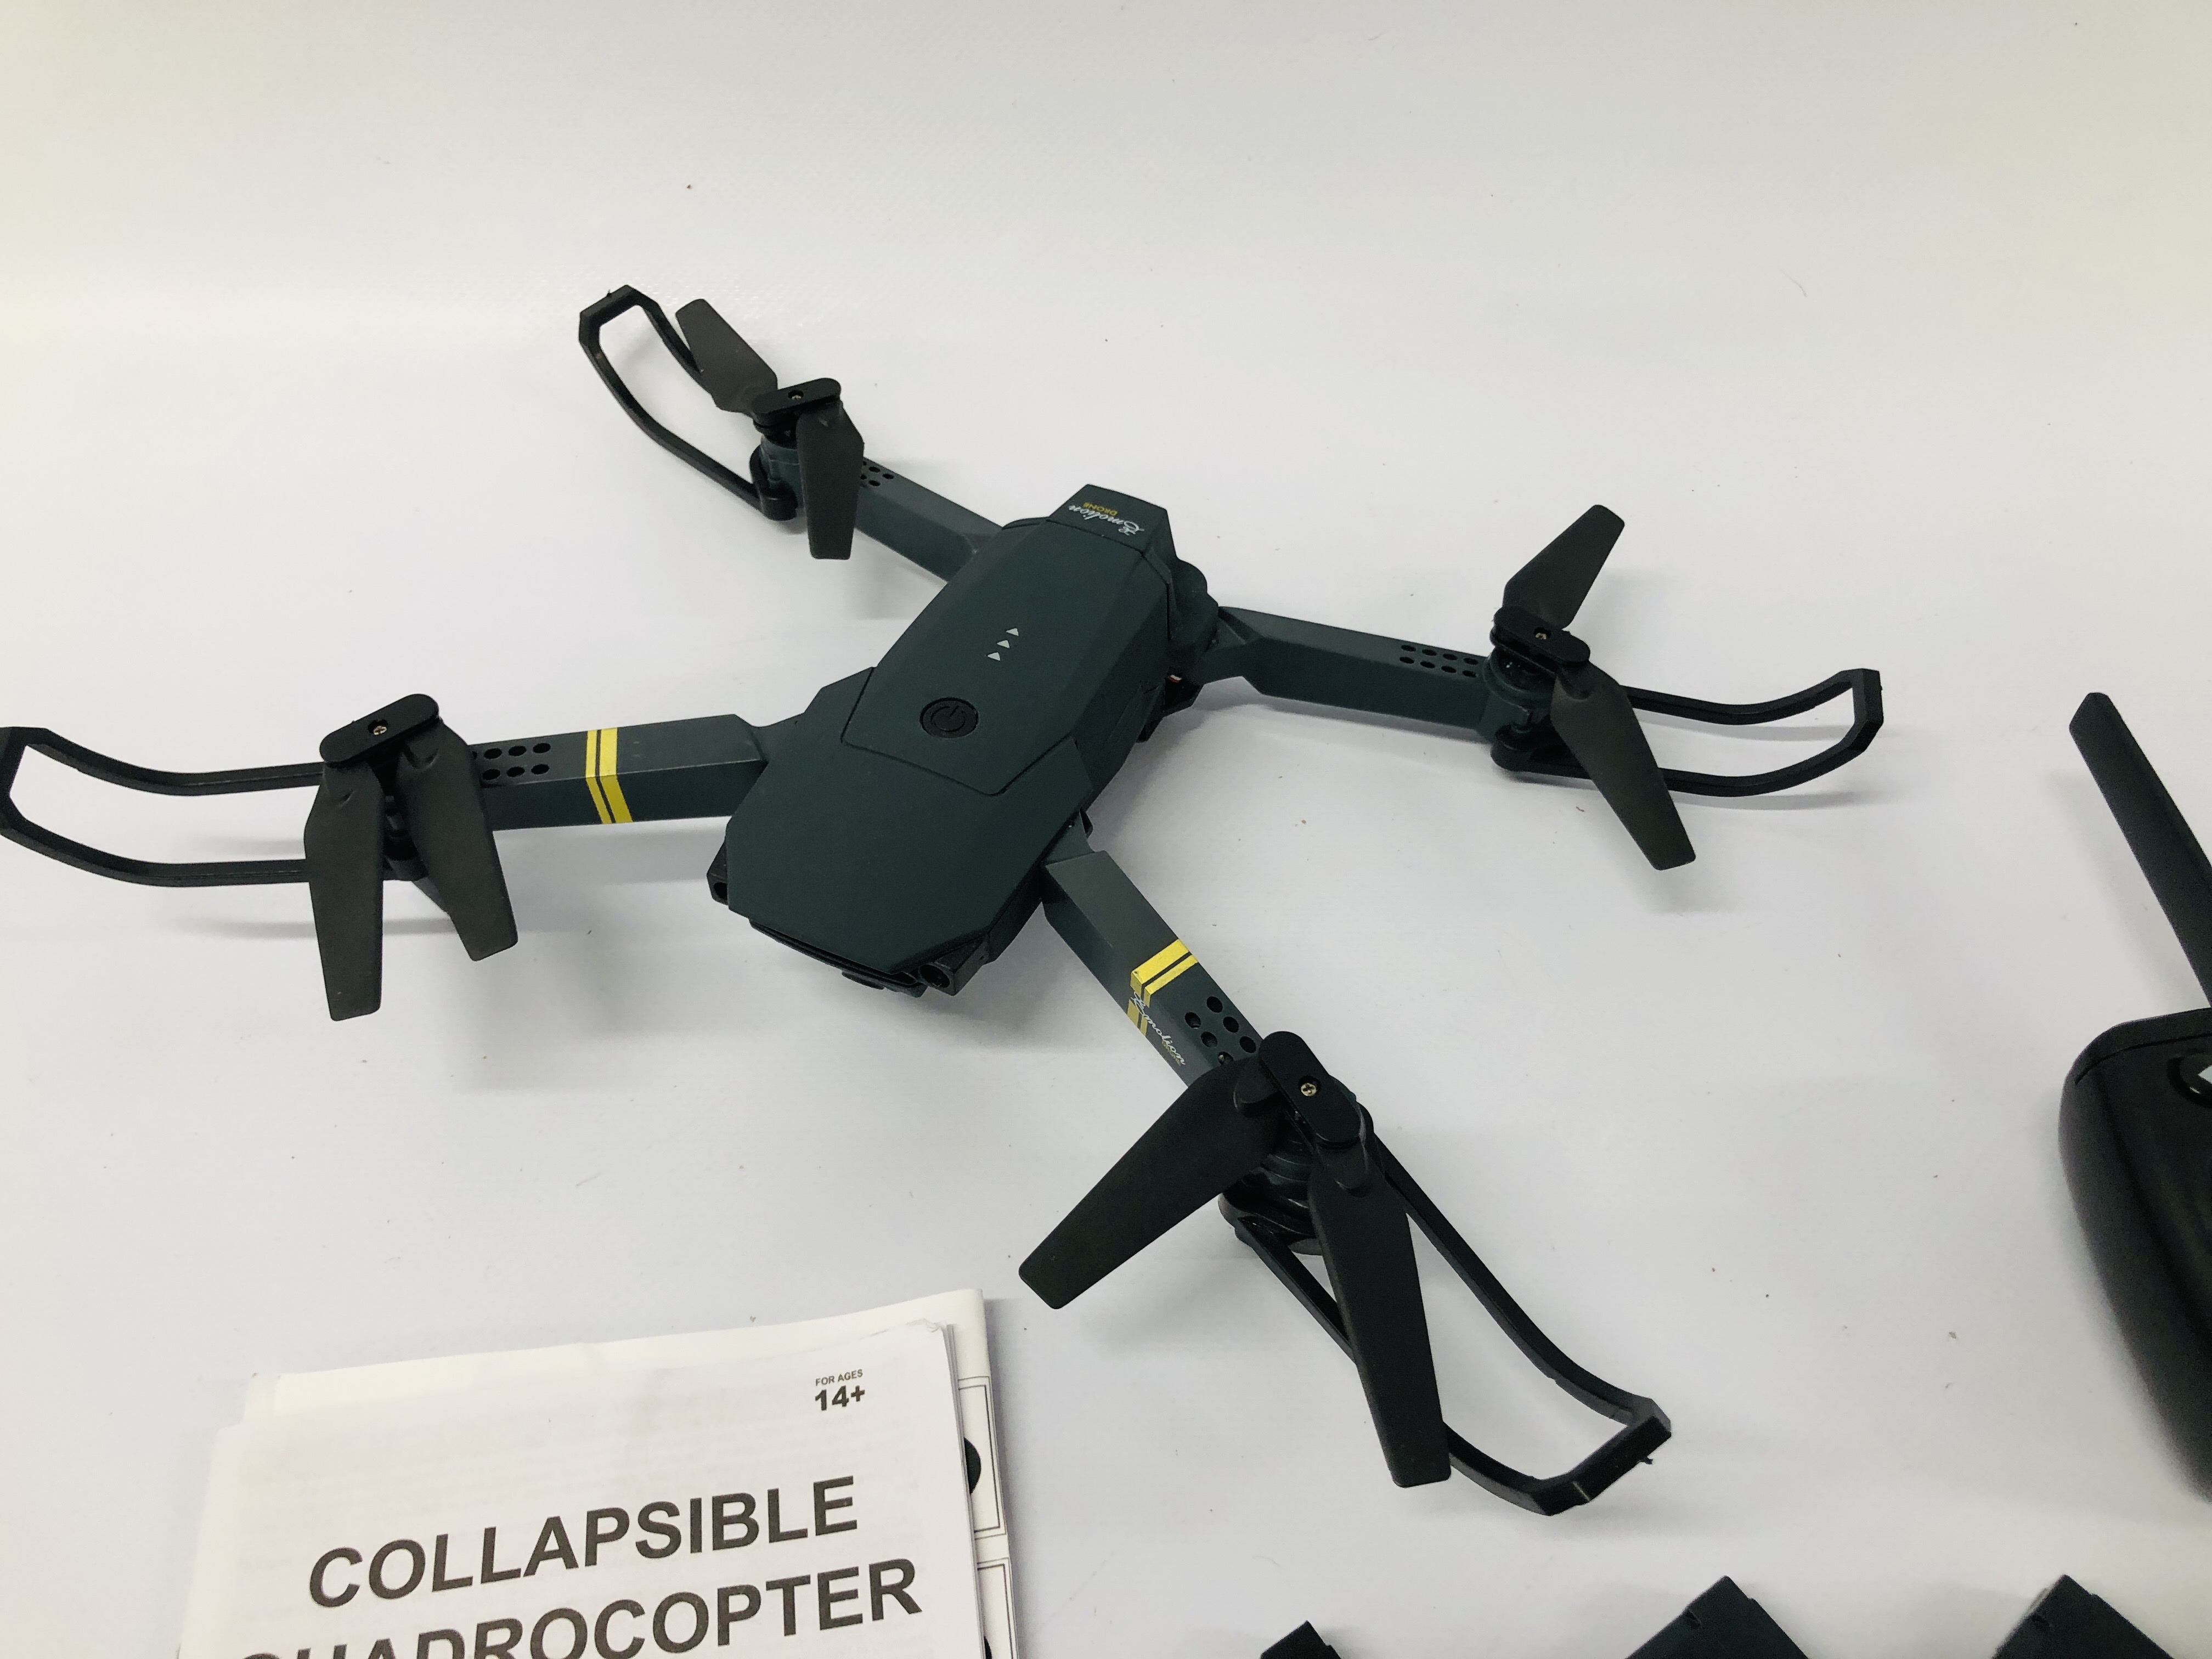 A COLLAPSIBLE QUADROCOPTER MOTION DRONE - Image 2 of 5